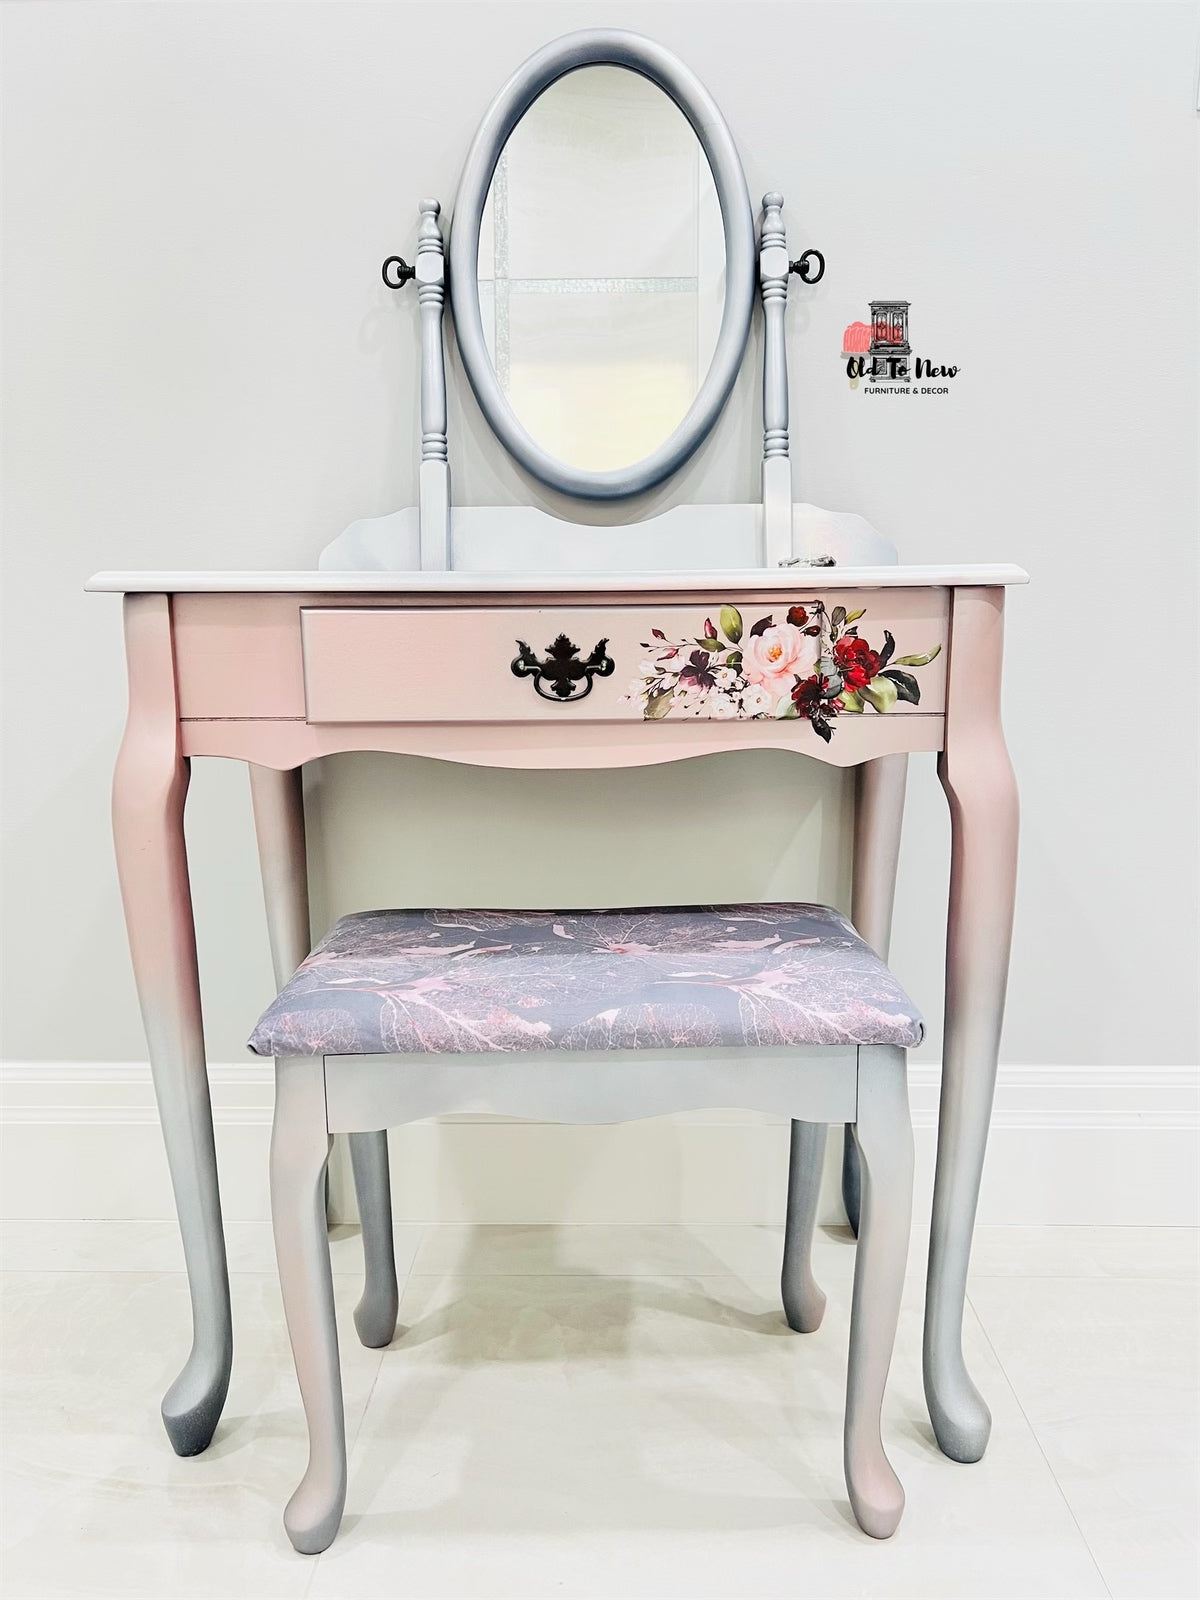 Luxury Vanity Dresser Set with Dressing Table & Stool. Painted a Metallic Sheen with Hokus Pokus Cage a’Oiseaux Transfer.